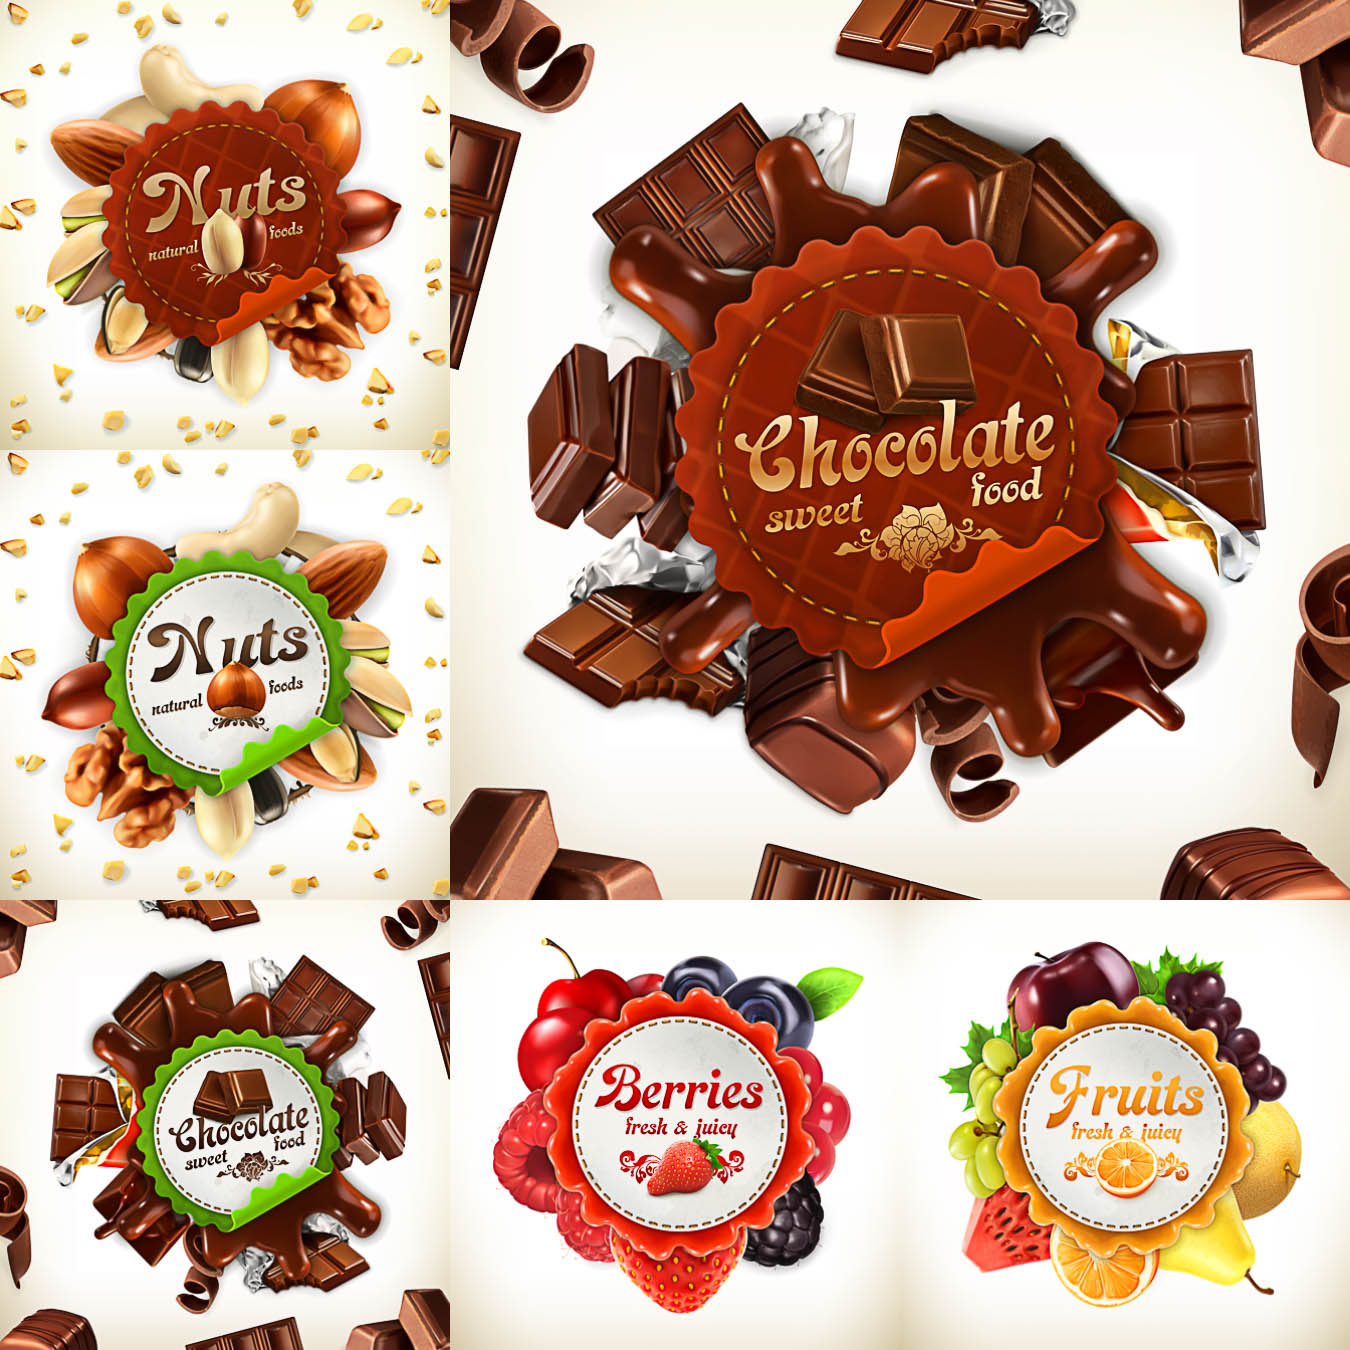 Chocolate, nuts, fruits, berries labels vector